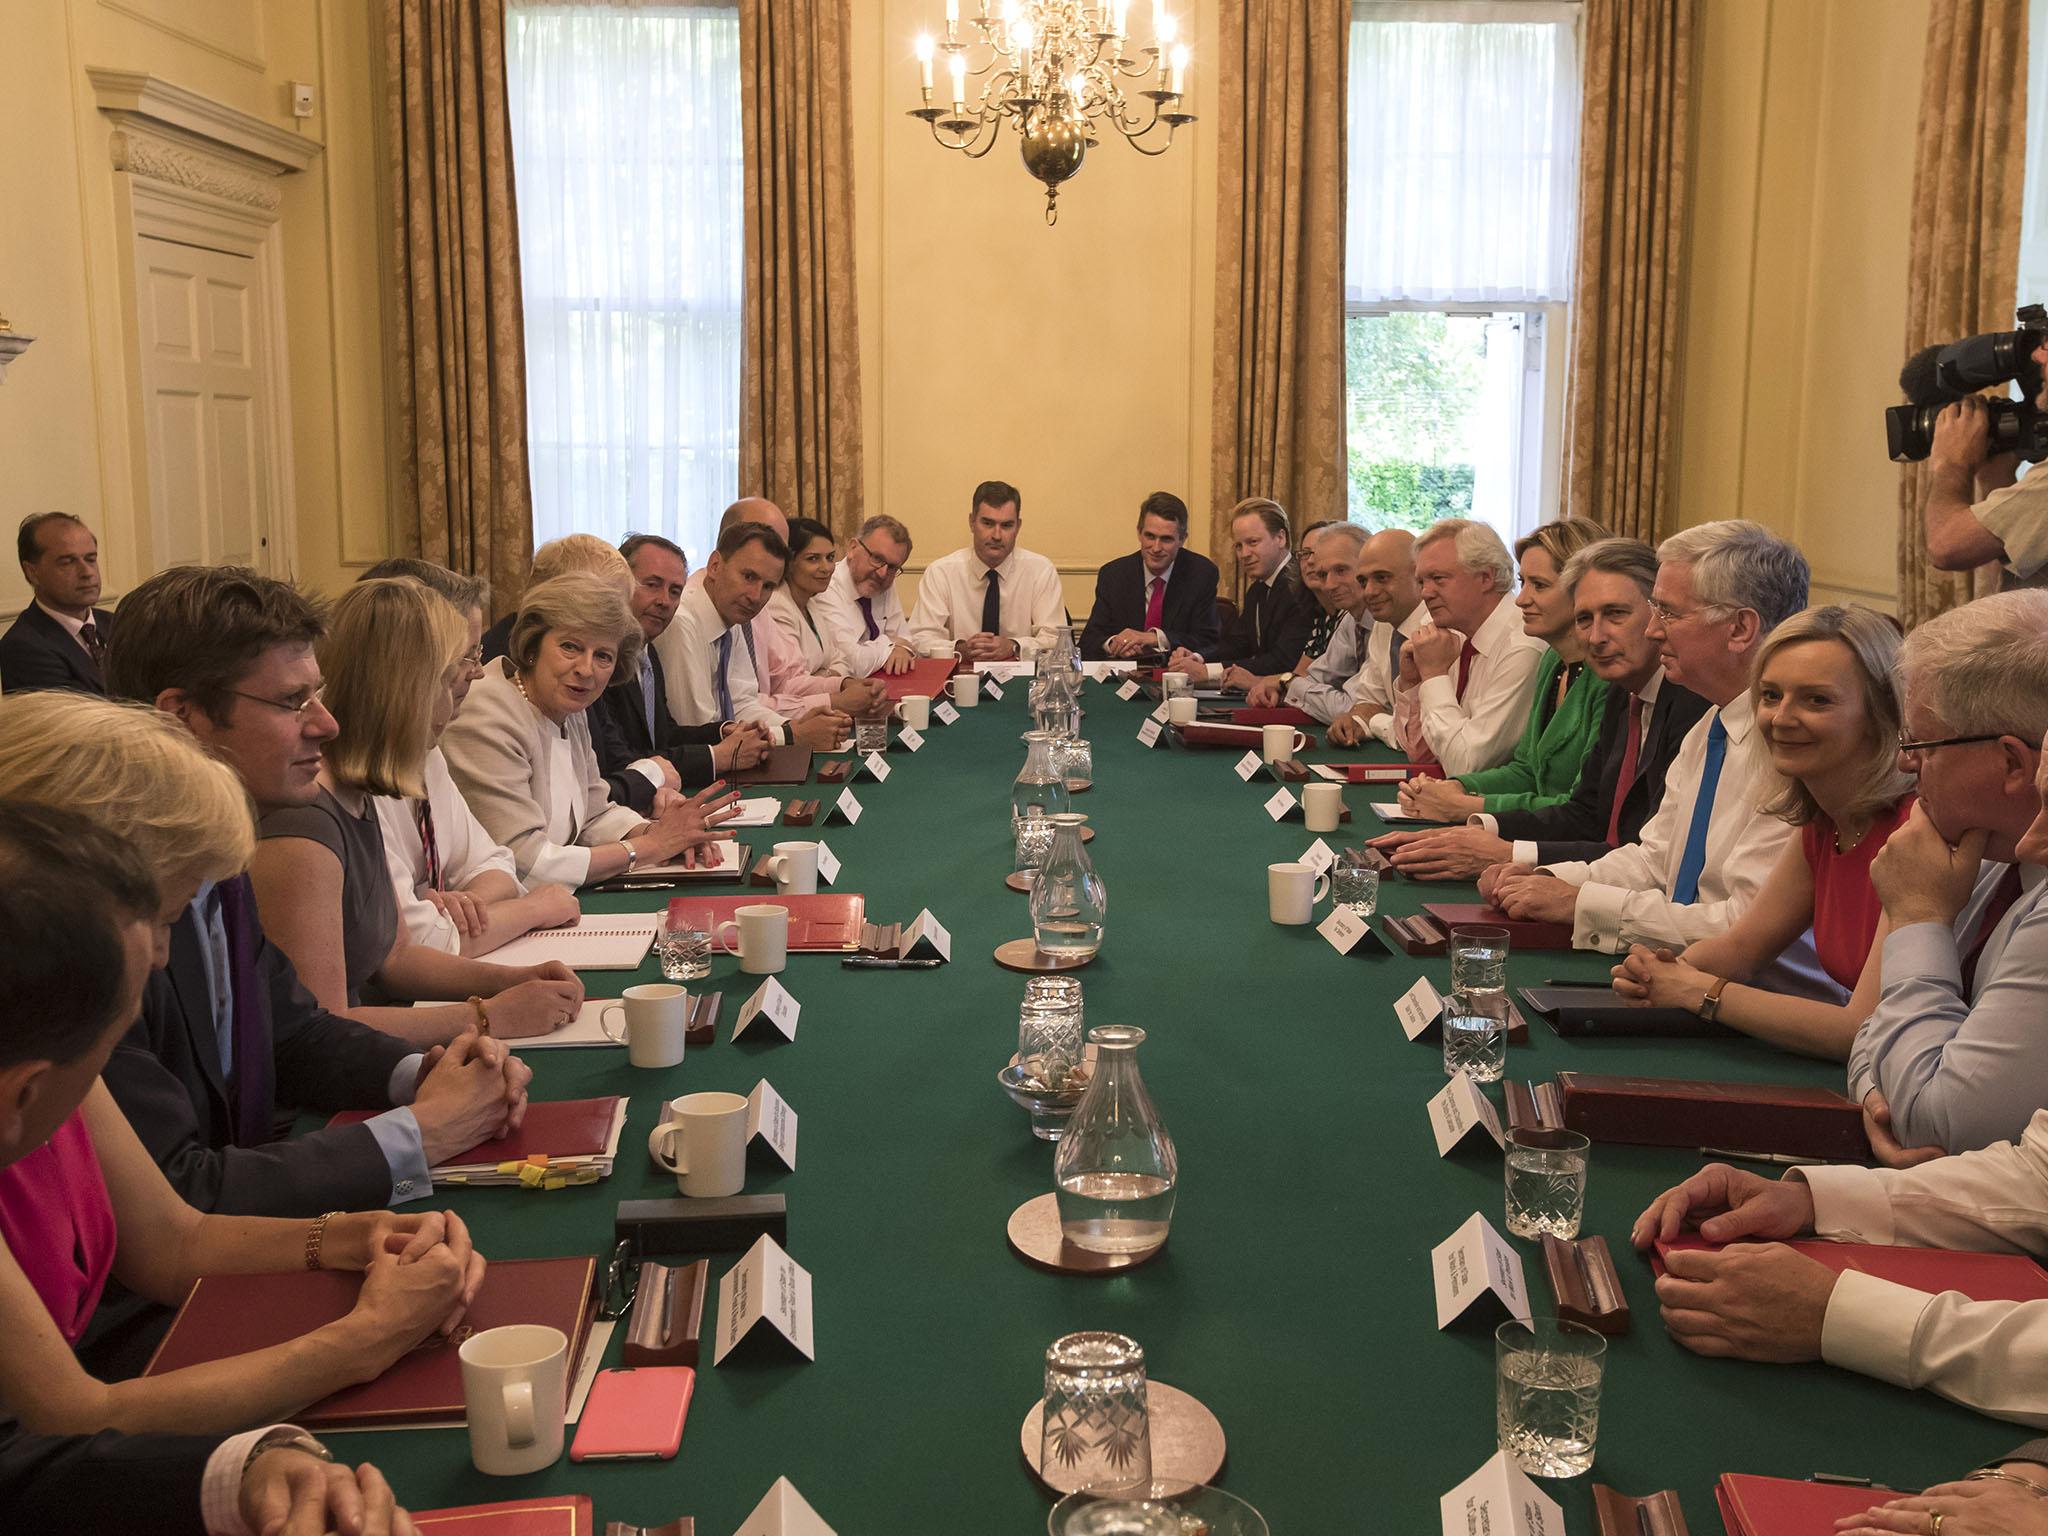 Theresa May chairs her first cabinet meeting after becoming prime minister, on 19 July 2016